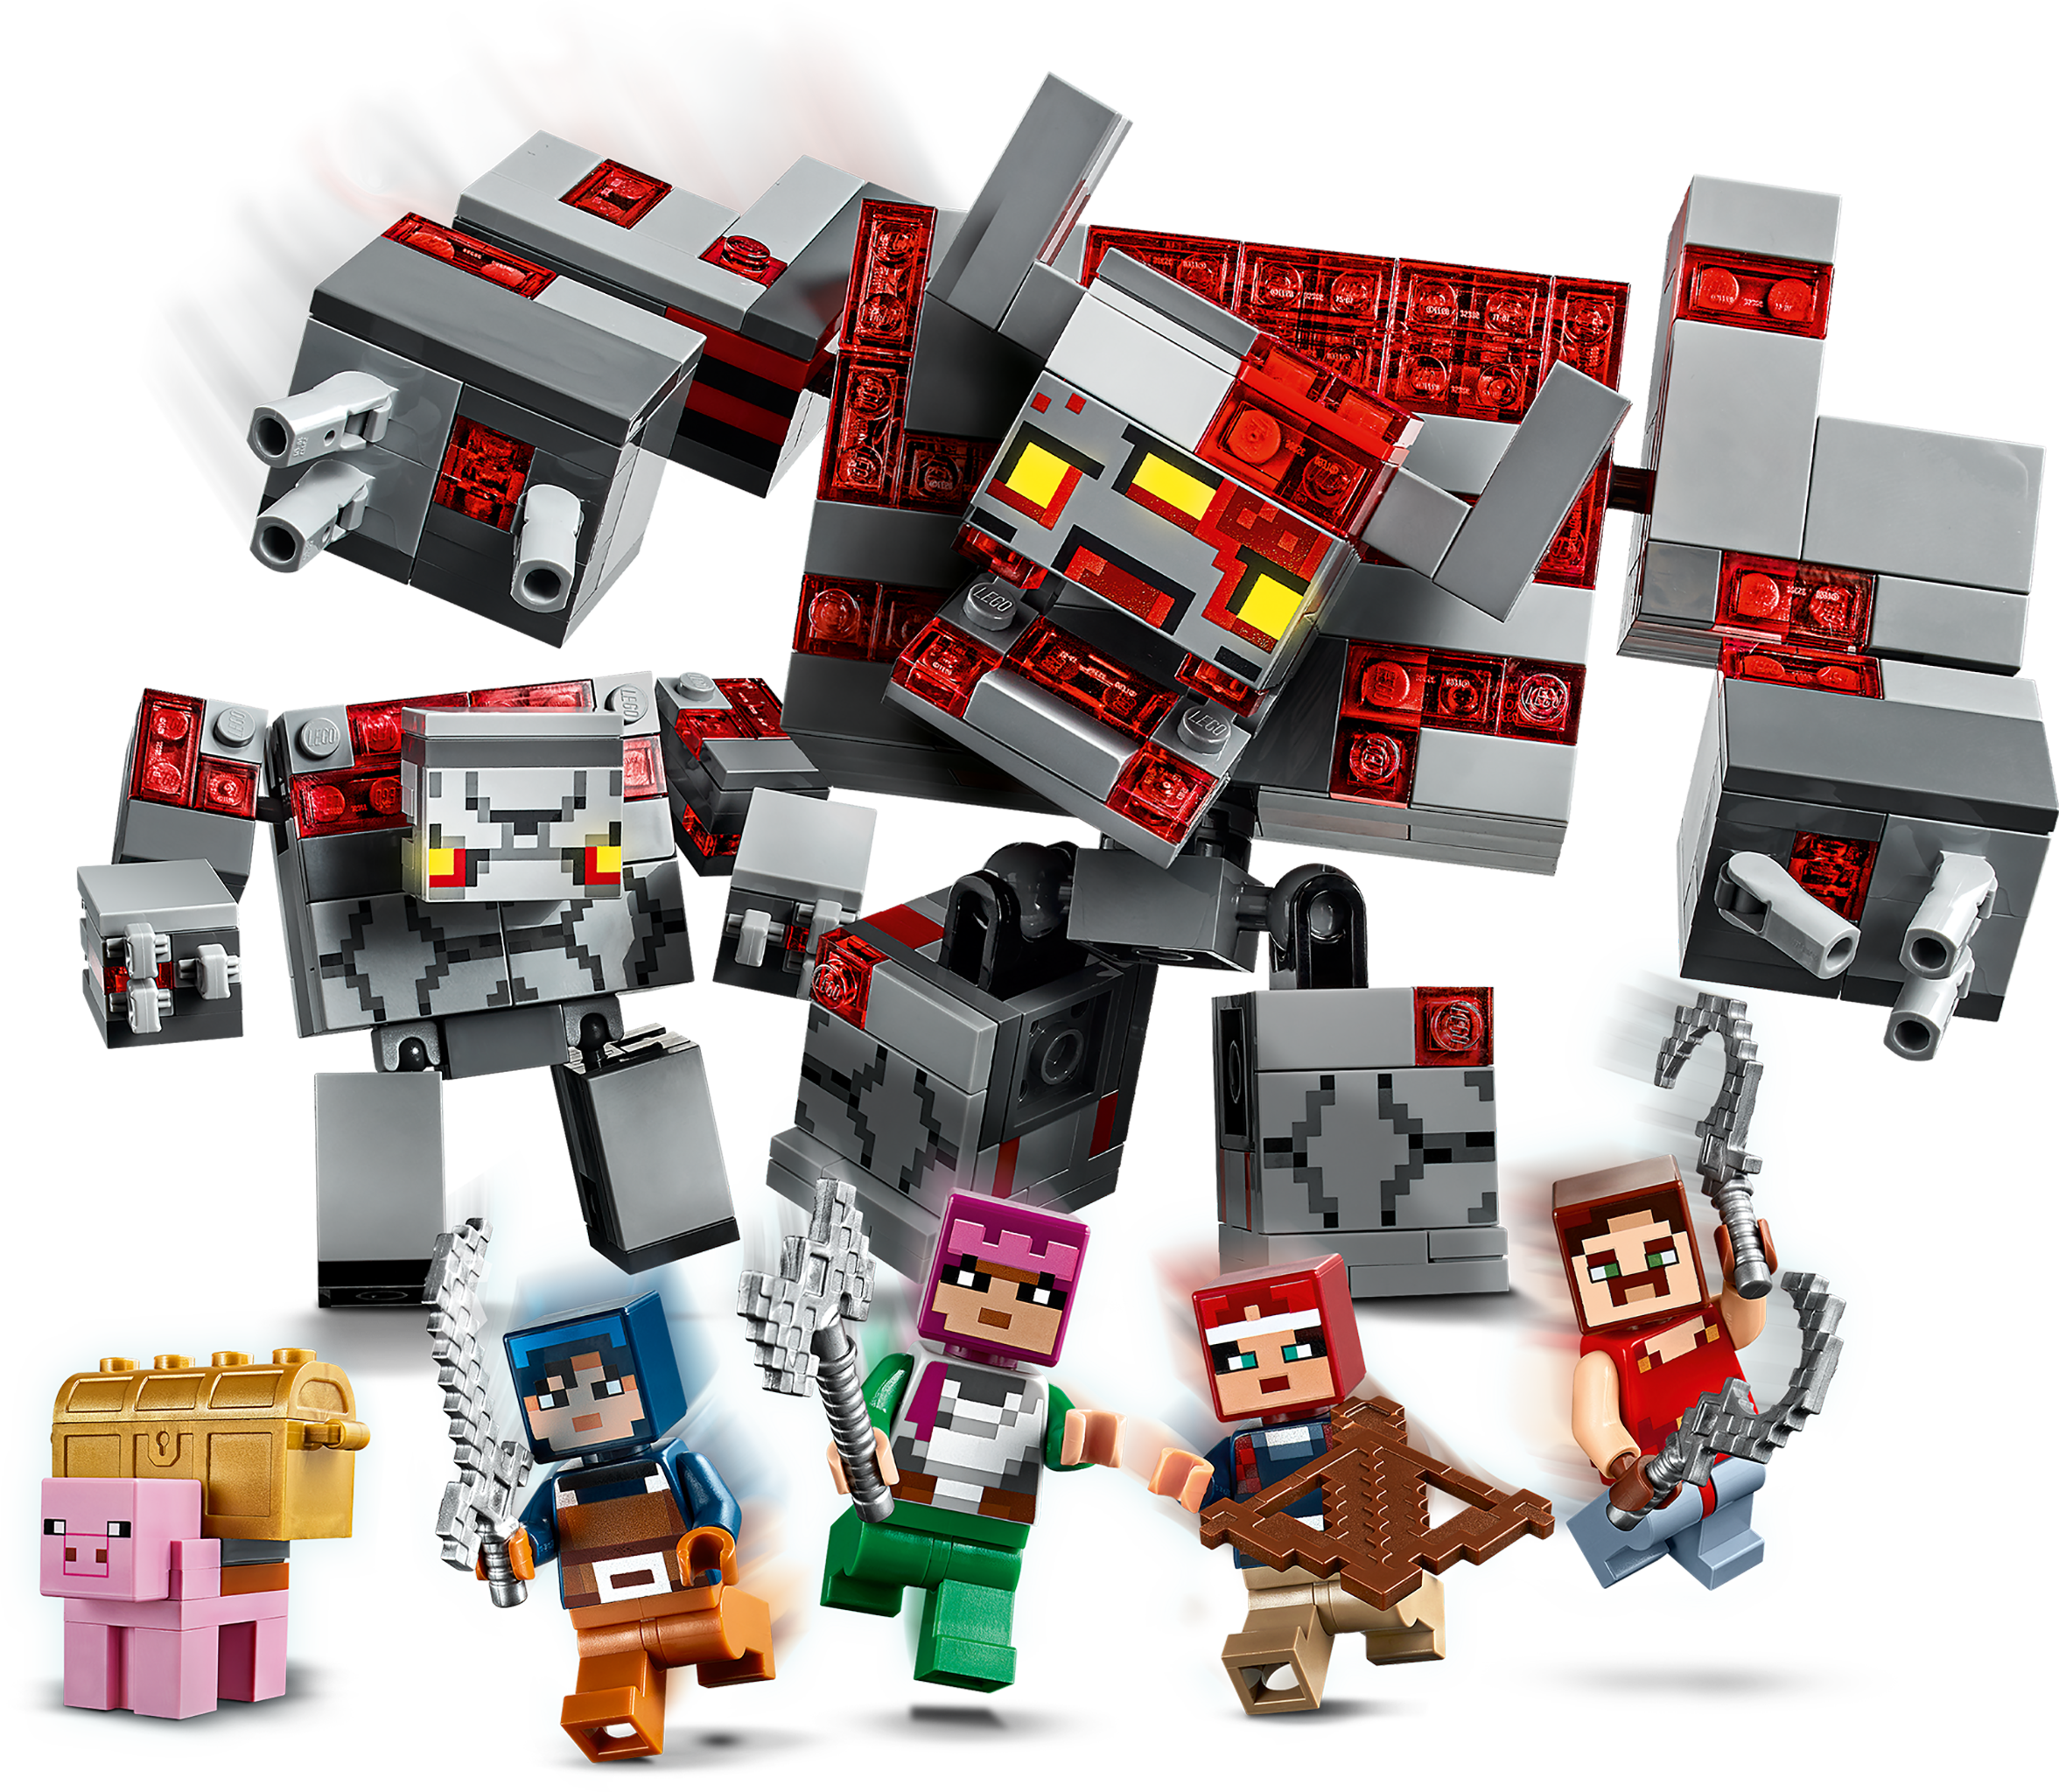 The Redstone Battle Minecraft Buy Online At The Official Lego Shop My